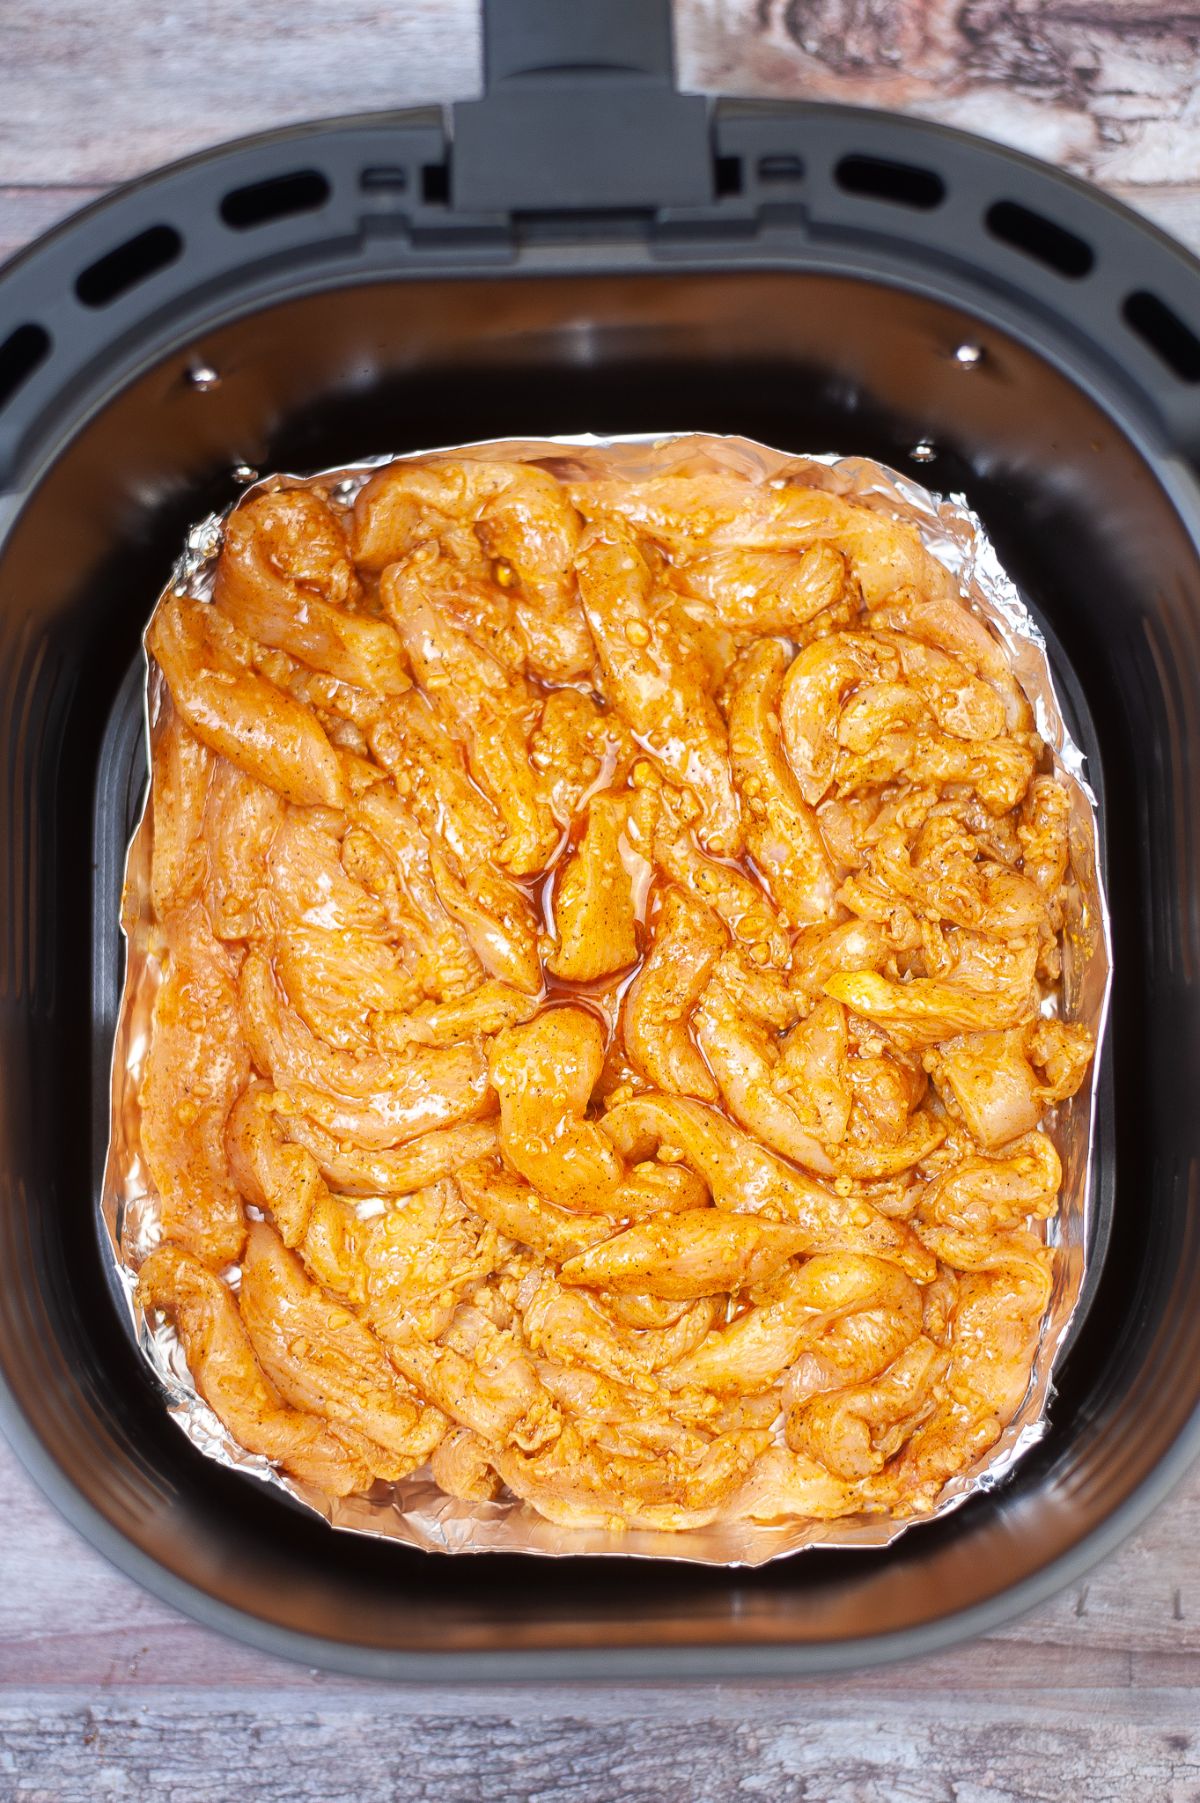 The Air Fryer is lined with aluminum foil tray and filled with marinated chicken.